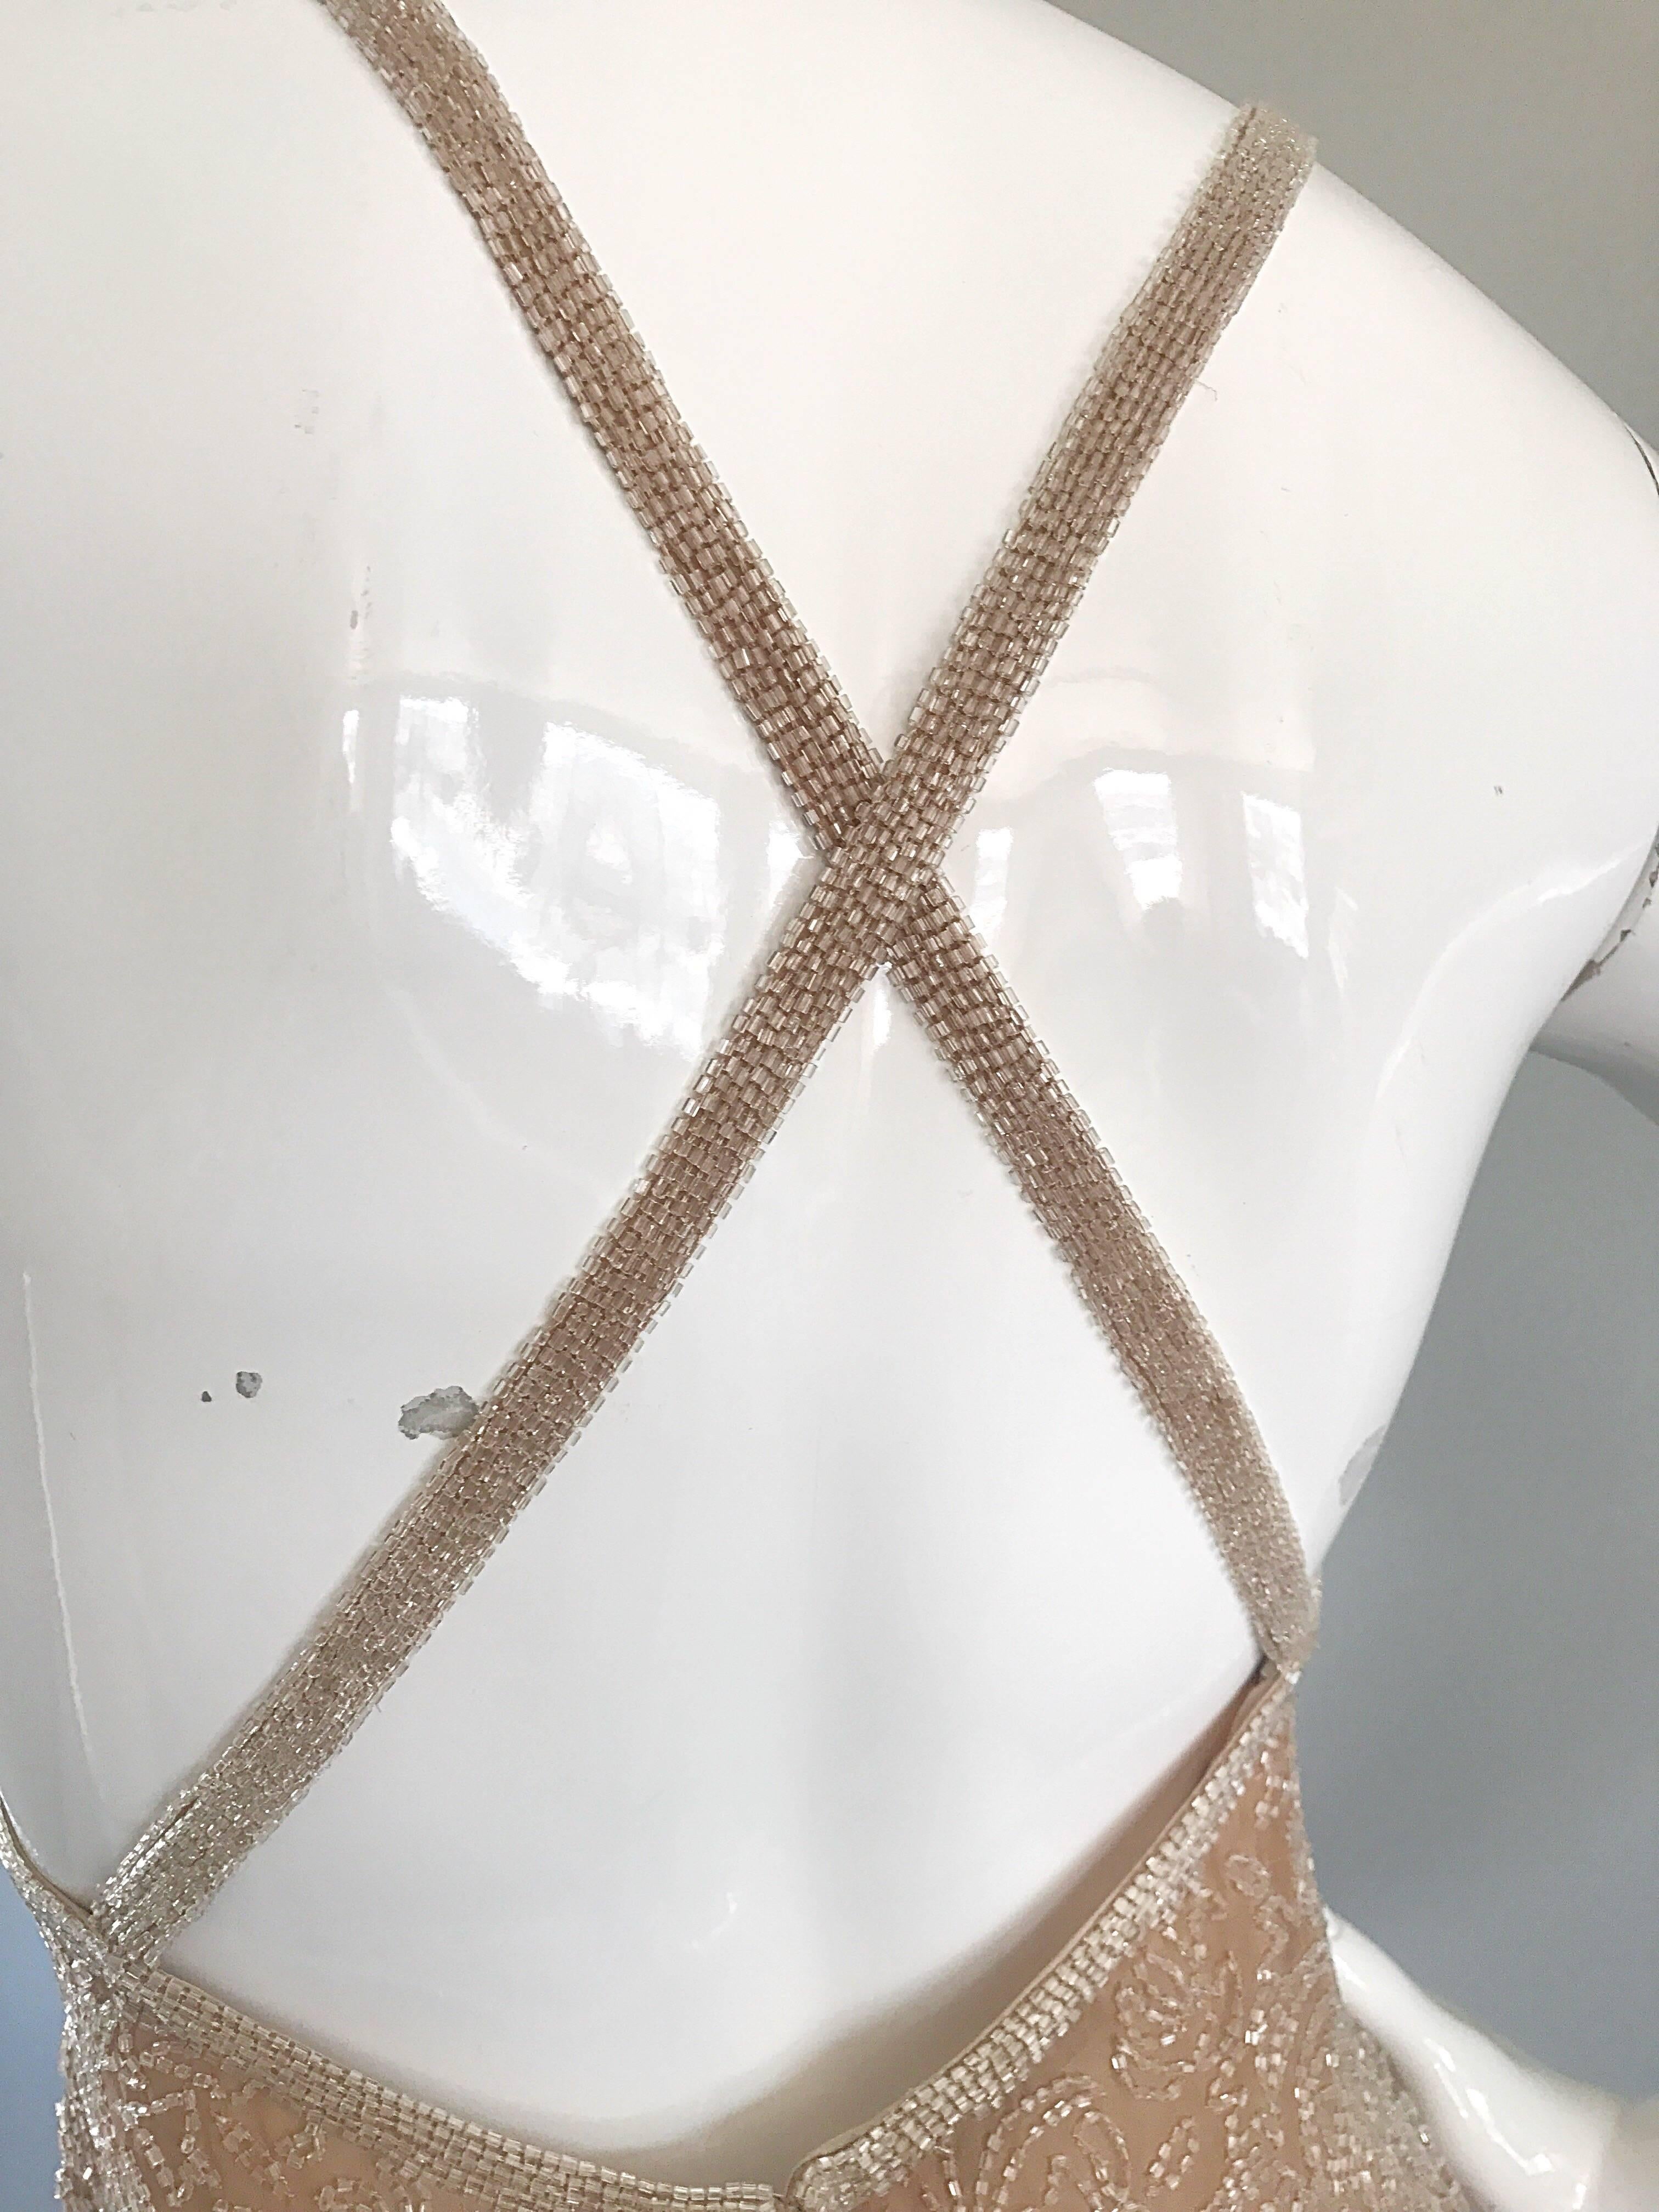 Gorgeous and flirty brand new (with tags) nude / tan heavily beaded babydoll dress! Features thousands of hand-sewn clear iridescent seed beads throughout. Flattering racerback 
criss-cross back. Fitted bodice with a flirty skirt. Hidden zipper up